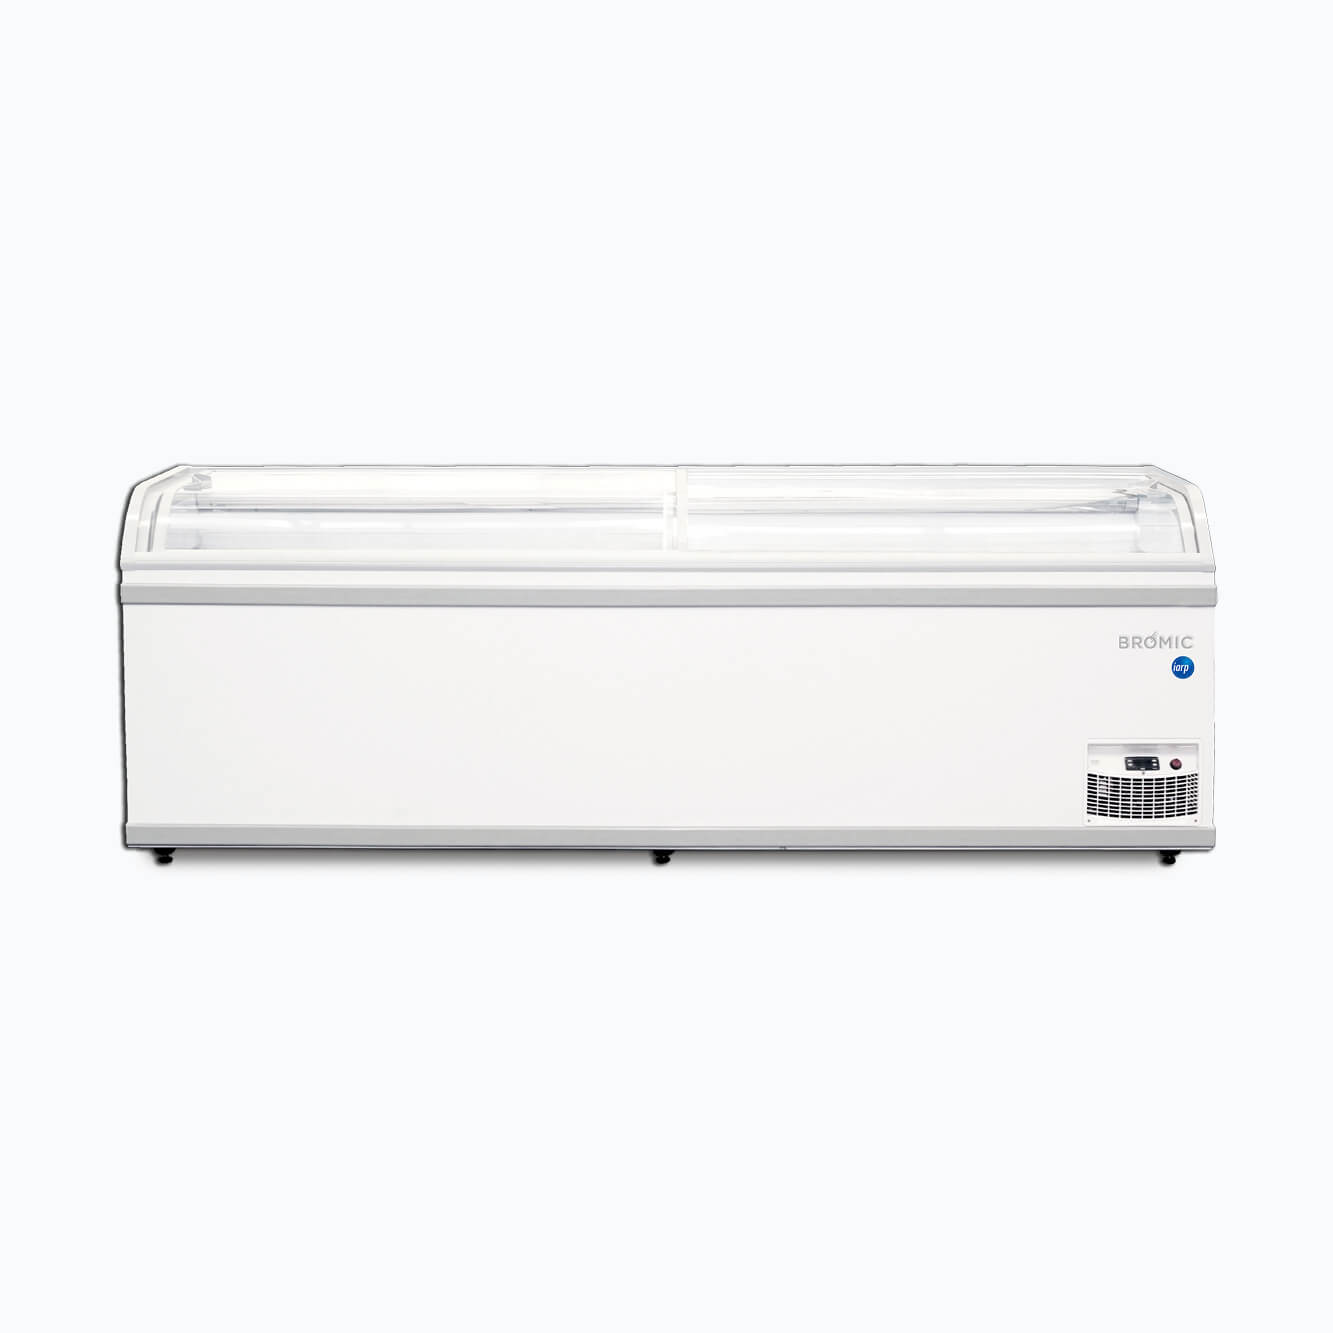 Image of a 2500mm wide white commercial island freezer, front view.